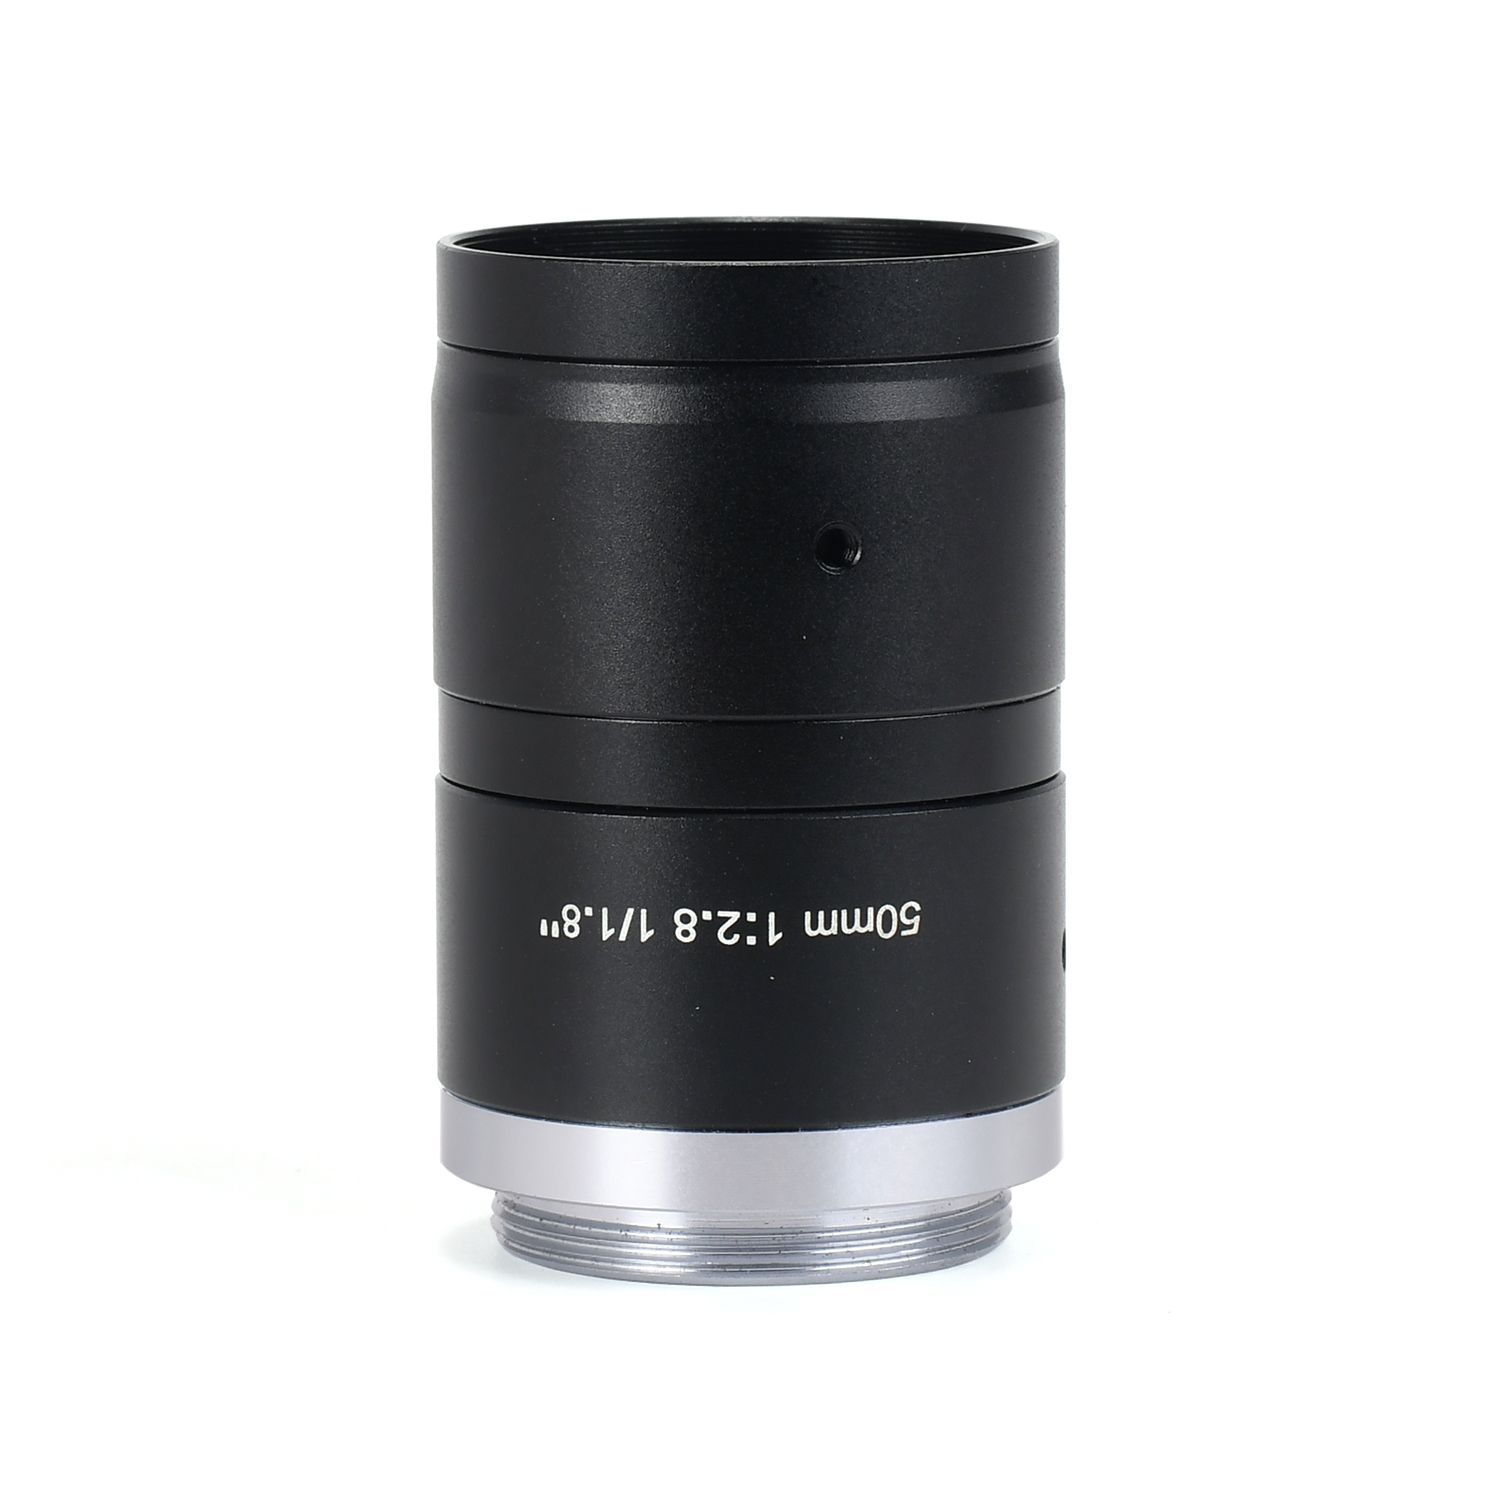 High Definition FA 50mm 1/1.8" Machine Vision Lens Without Distortion Professional C-Mouth Industrial Camera lens